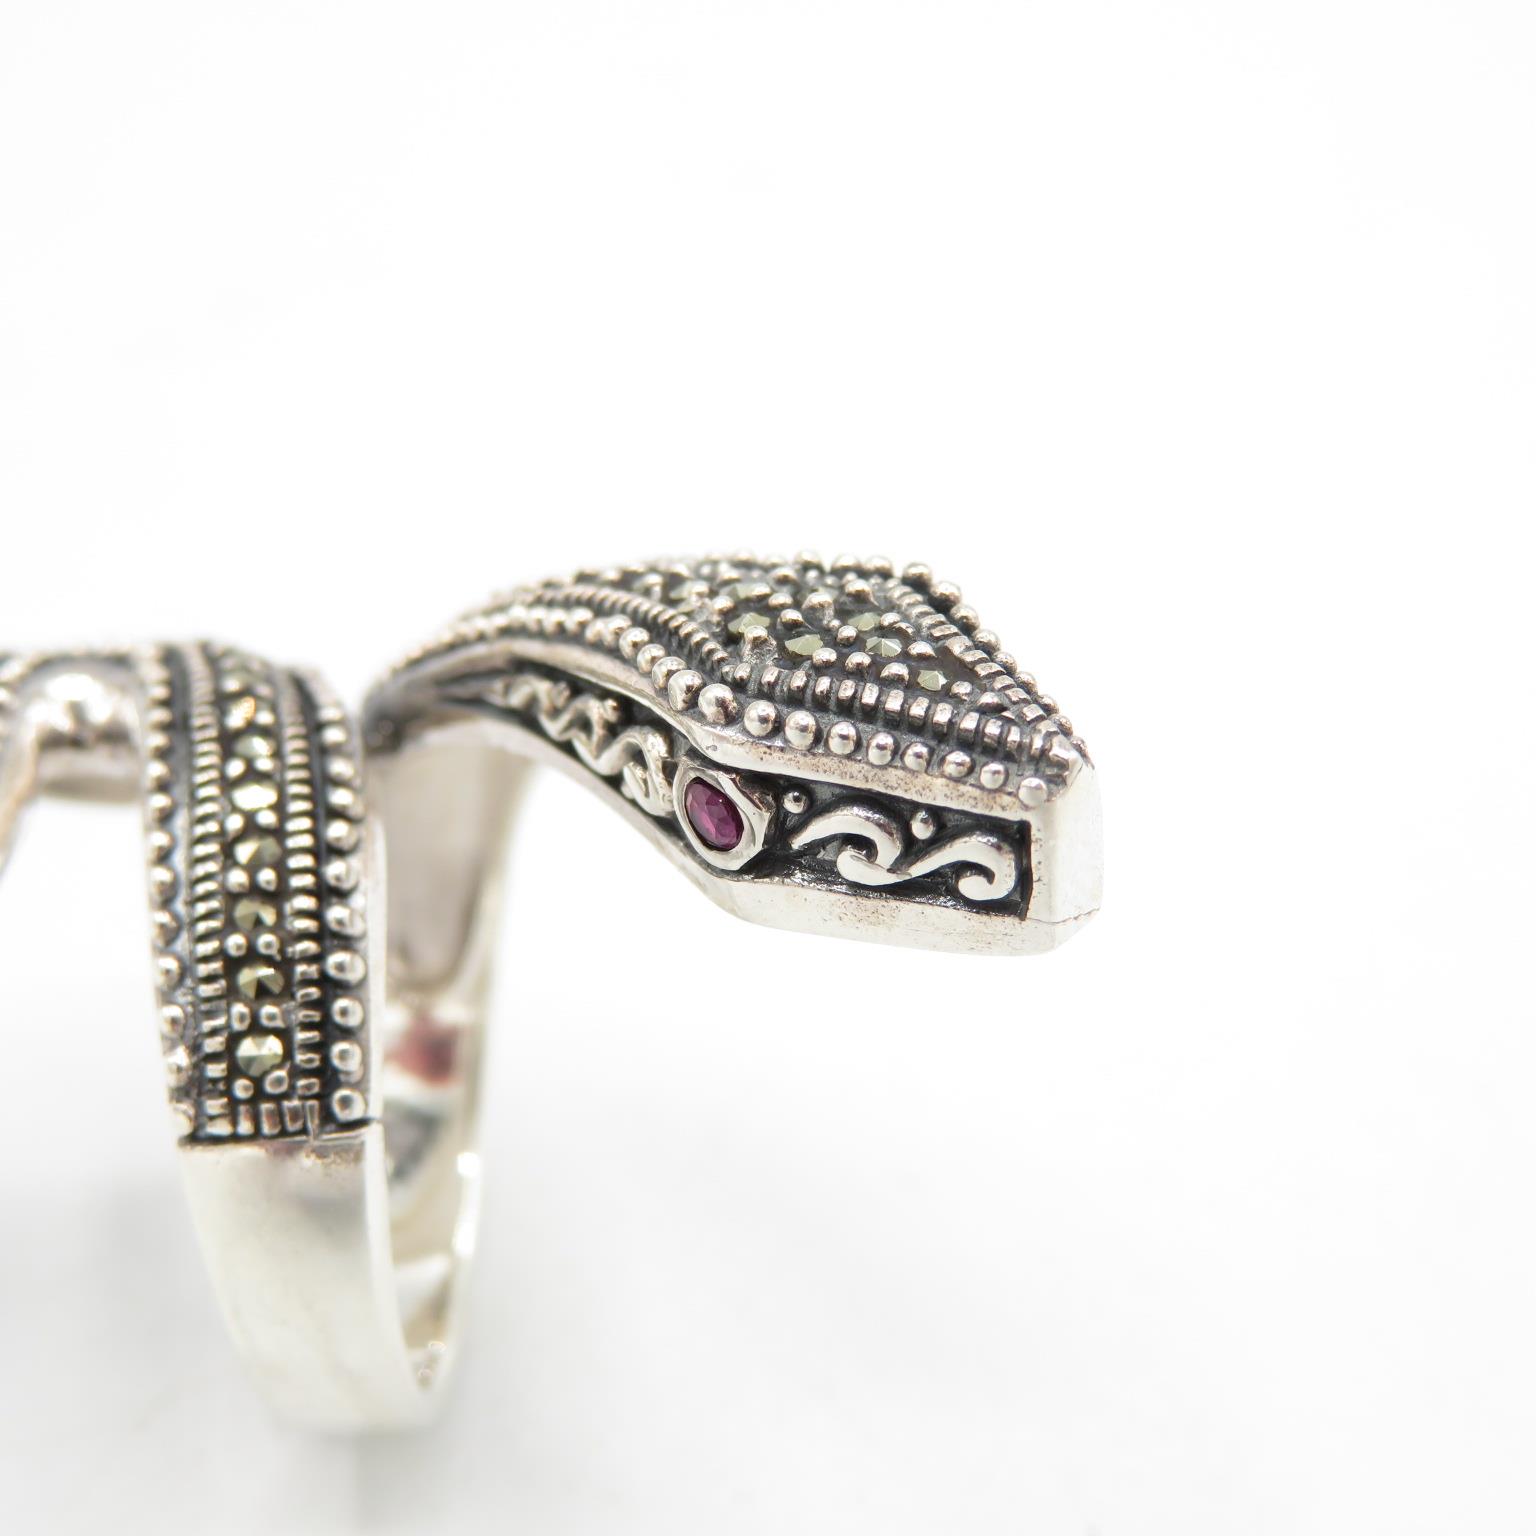 HM Sterling Silver 925 long snake ring with red stone eyes and curled tail (10.7g) In excellent - Image 3 of 6